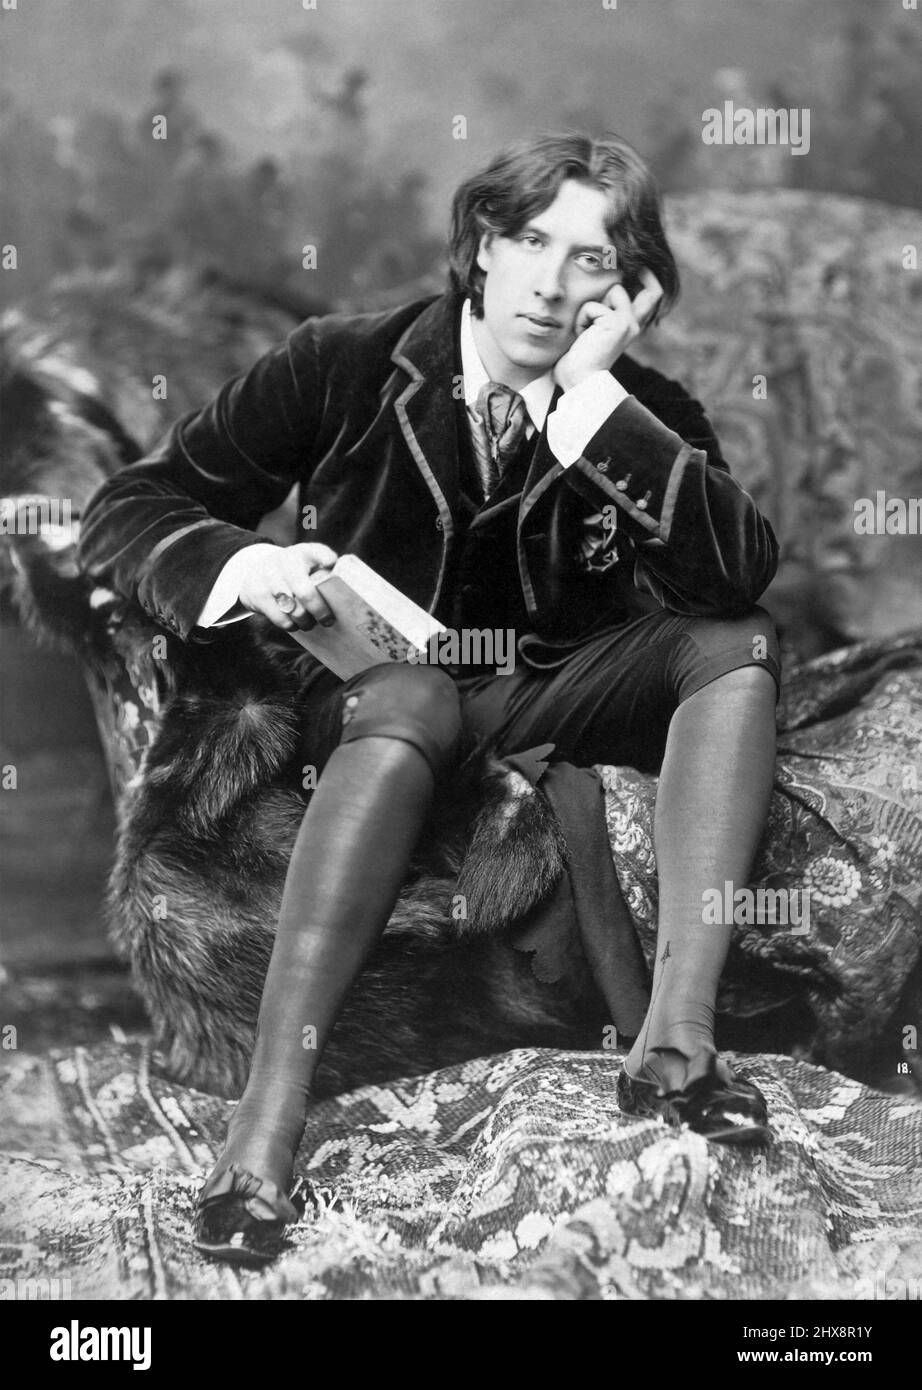 Oscar Wilde (1854-1900) was an Irish author, poet and playwright known for his wit, philosophical aestheticism, and hedonism. Wilde was arrested, tried, and convicted in 1885 for gross indecency with men, and served two years in prison. A few years later he died destitute in Paris at the age of 46. Stock Photo